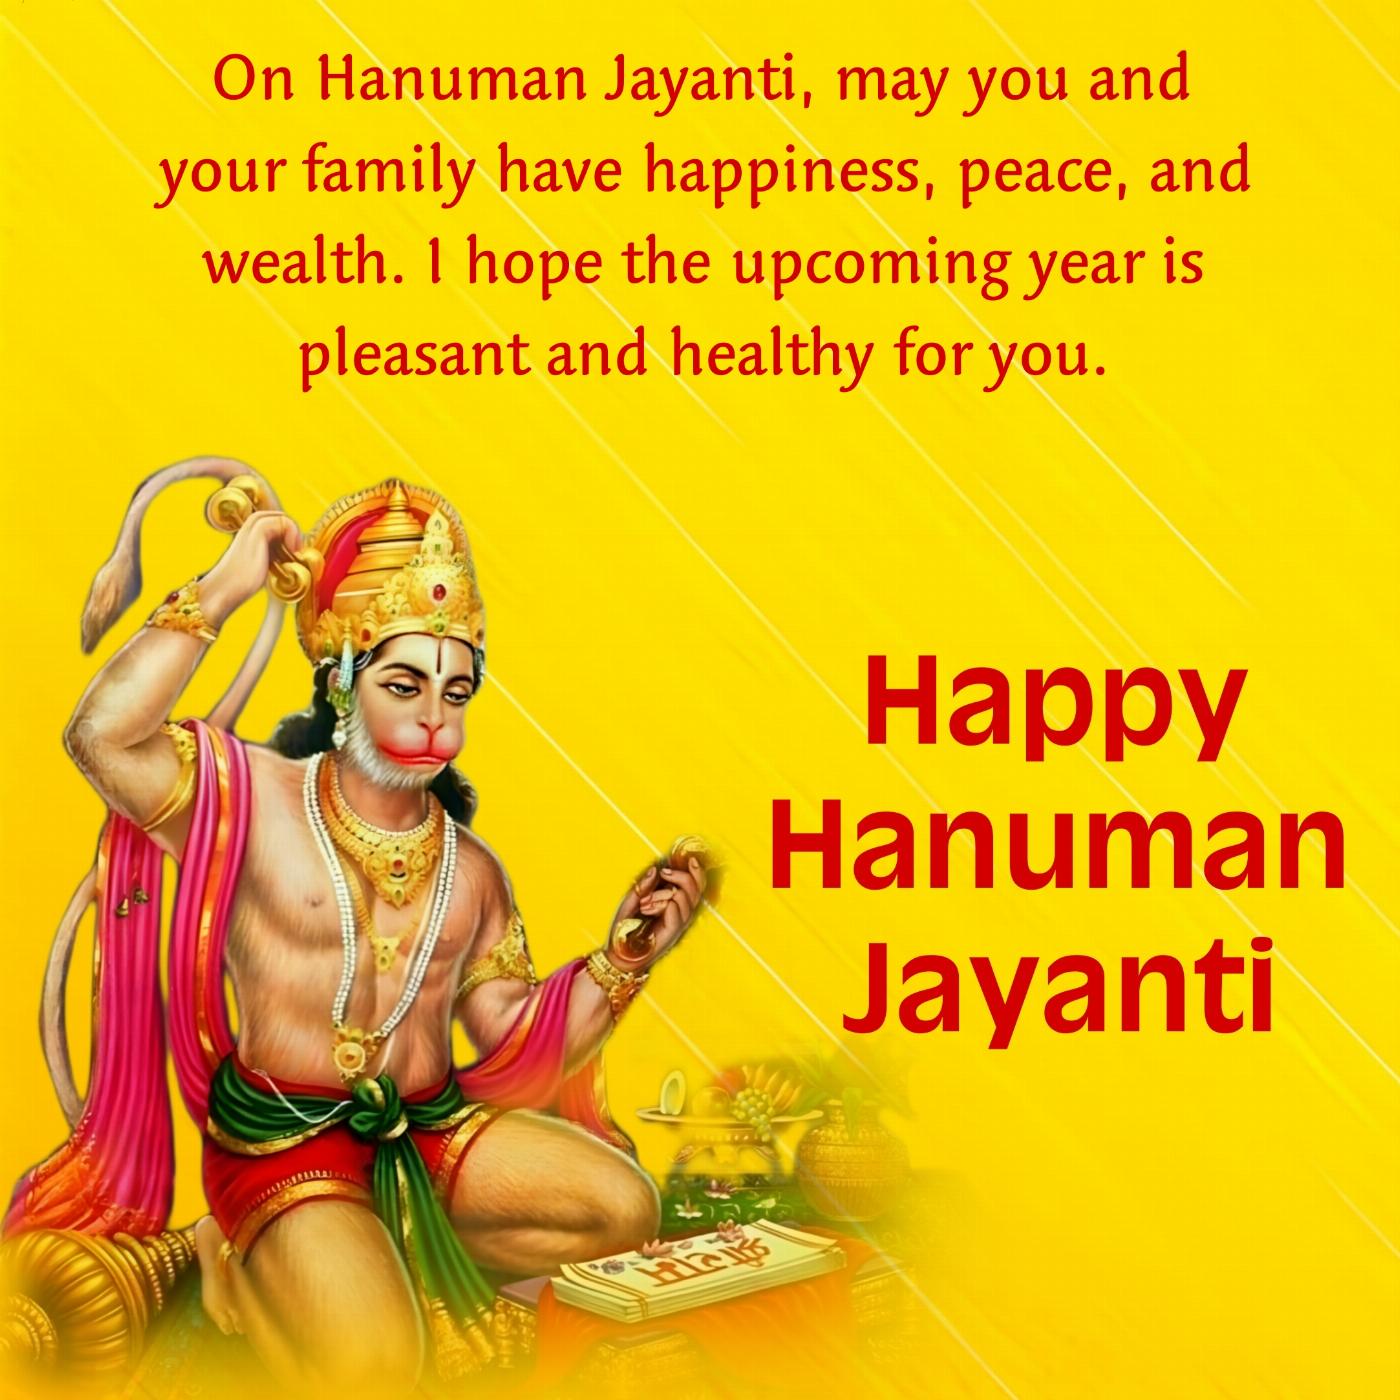 On Hanuman Jayanti may you and your family have happiness